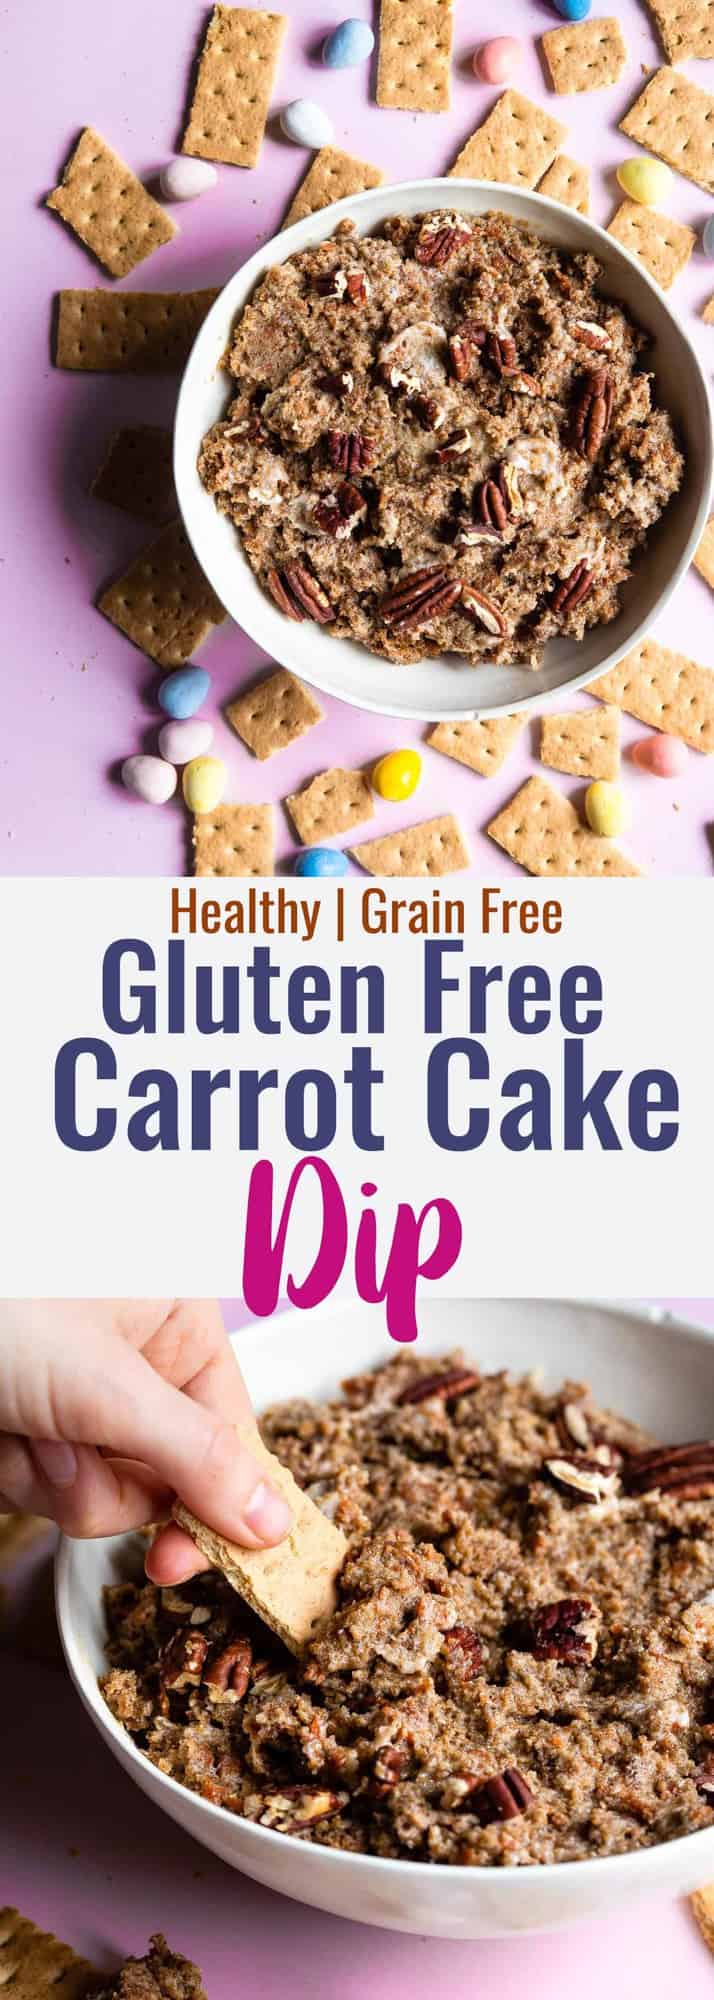 Gluten Free Carrot Cake Dip - This Gluten Free Coconut Flour Carrot Cake Dip is the EASIEST dessert you will ever make and is a huge crowd pleaser! Dairy free option included too! | #Foodfaithfitness | #Glutenfree #Healthy #Dairyfree #Easter #CarrotCake